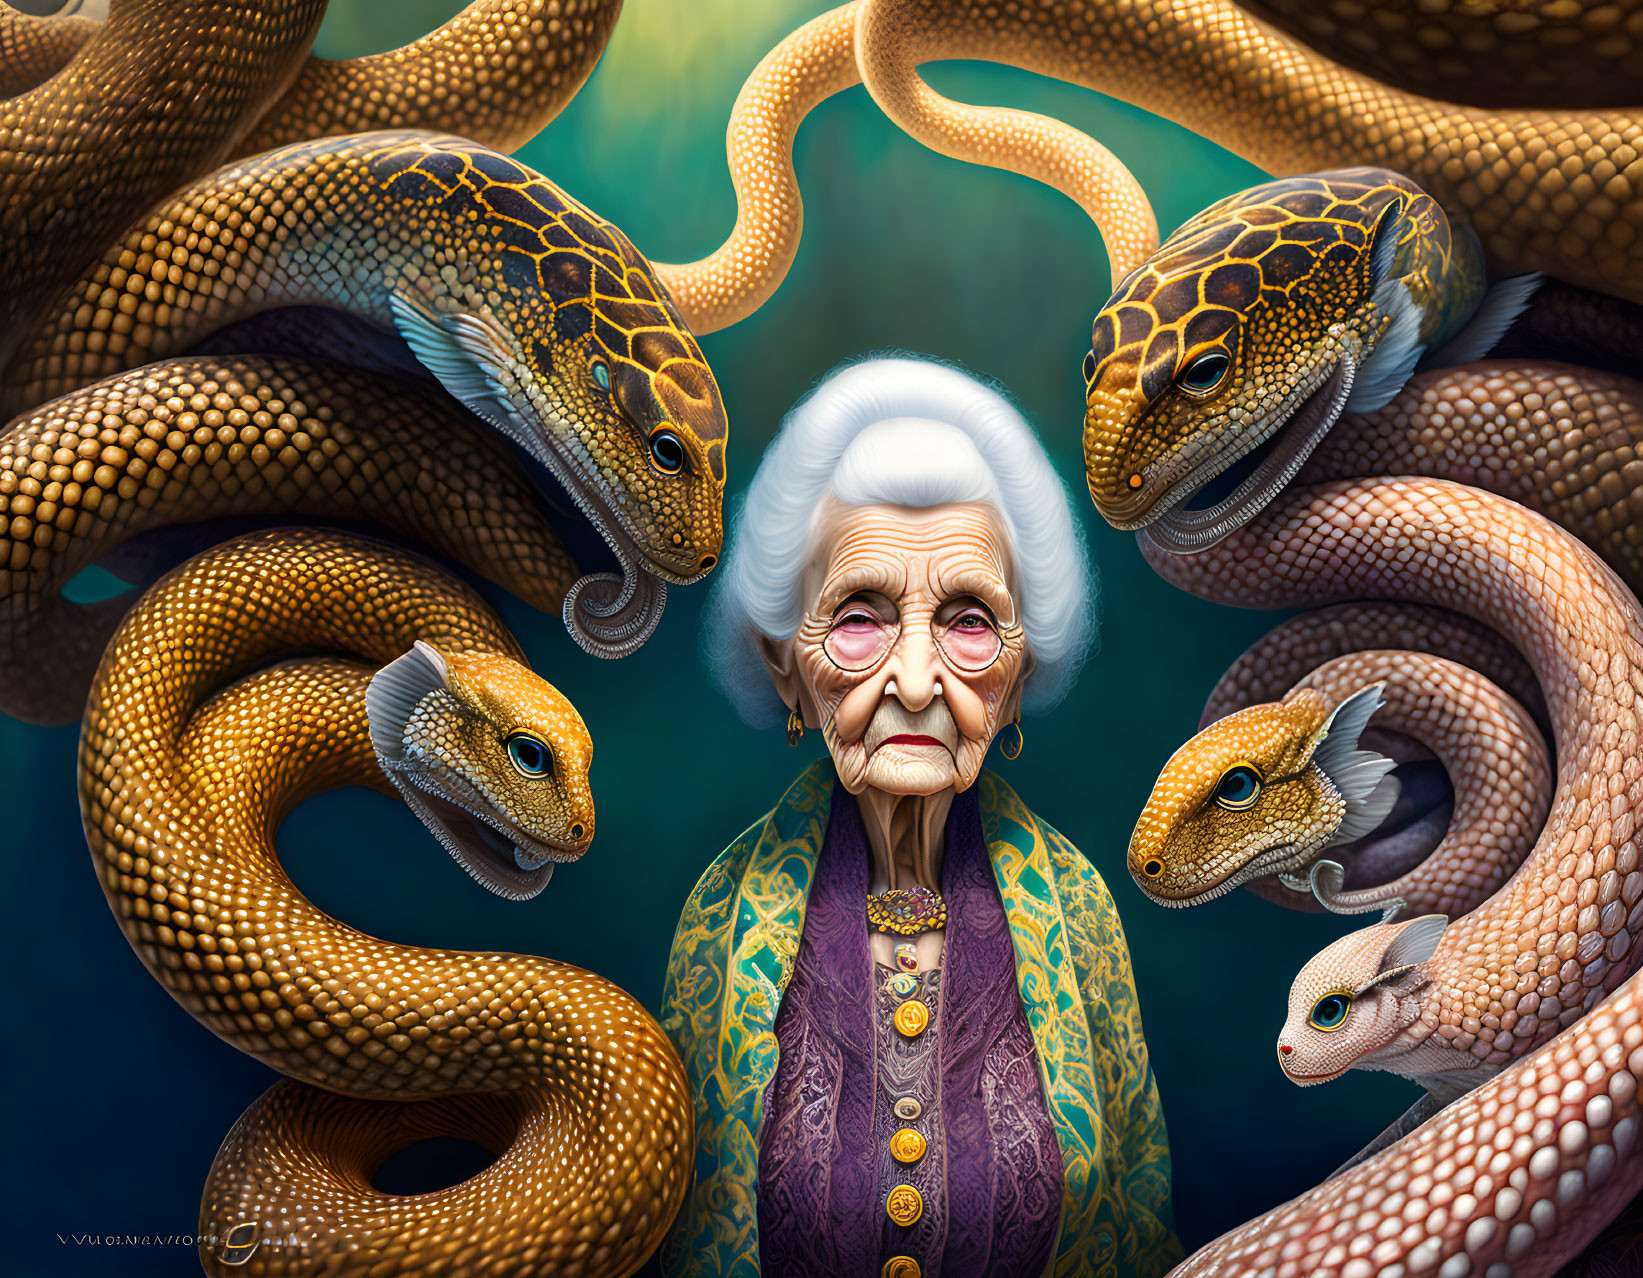 Elderly woman surrounded by intricate serpentine creatures